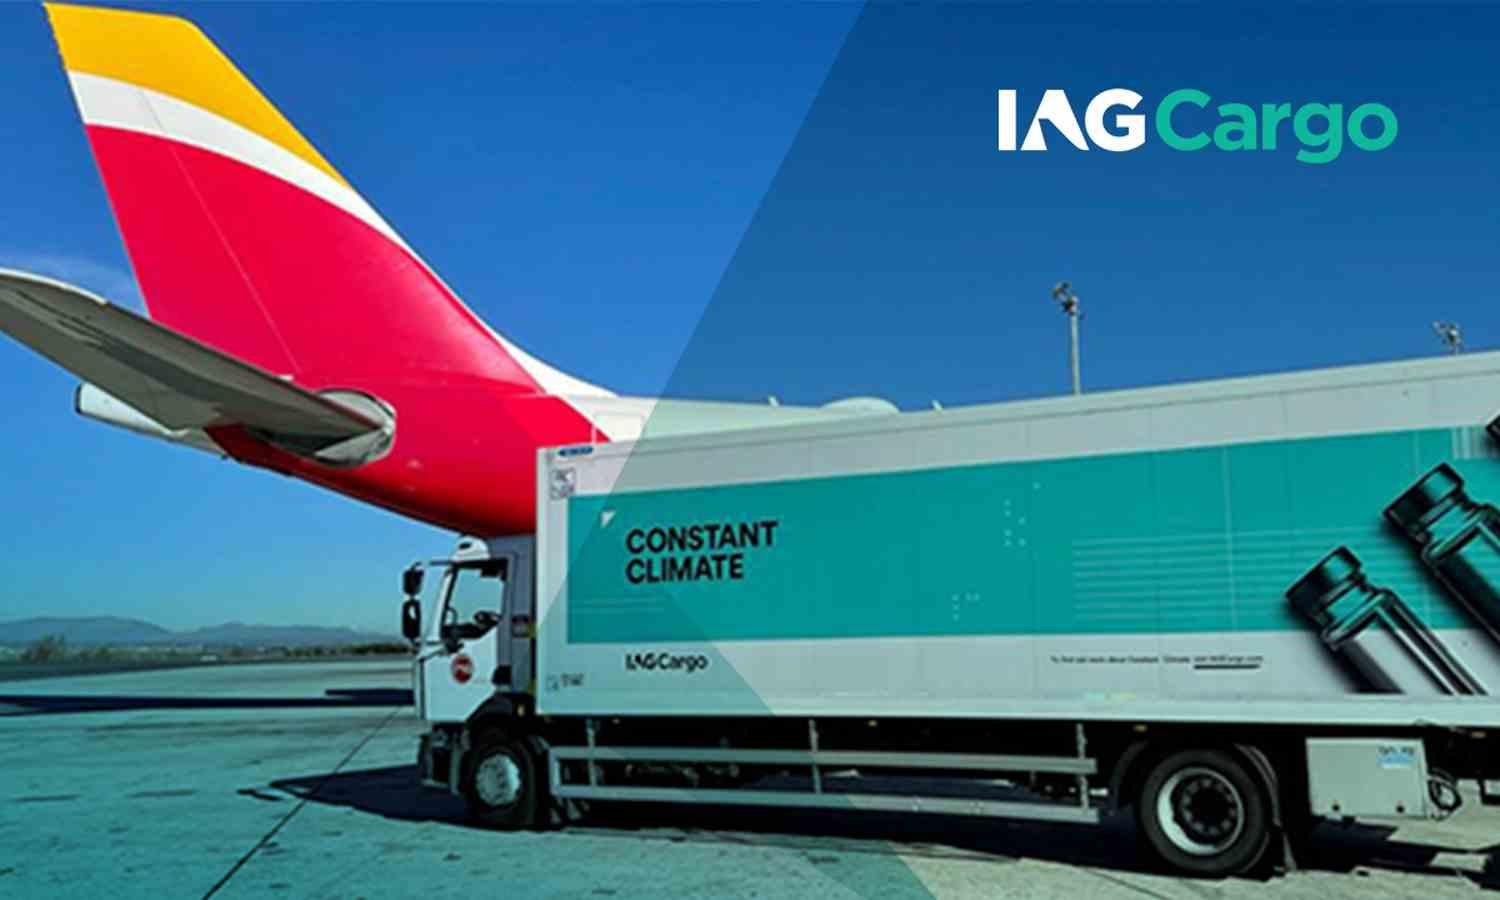 Neutral Air Partner welcomes IAG Cargo as airline partner